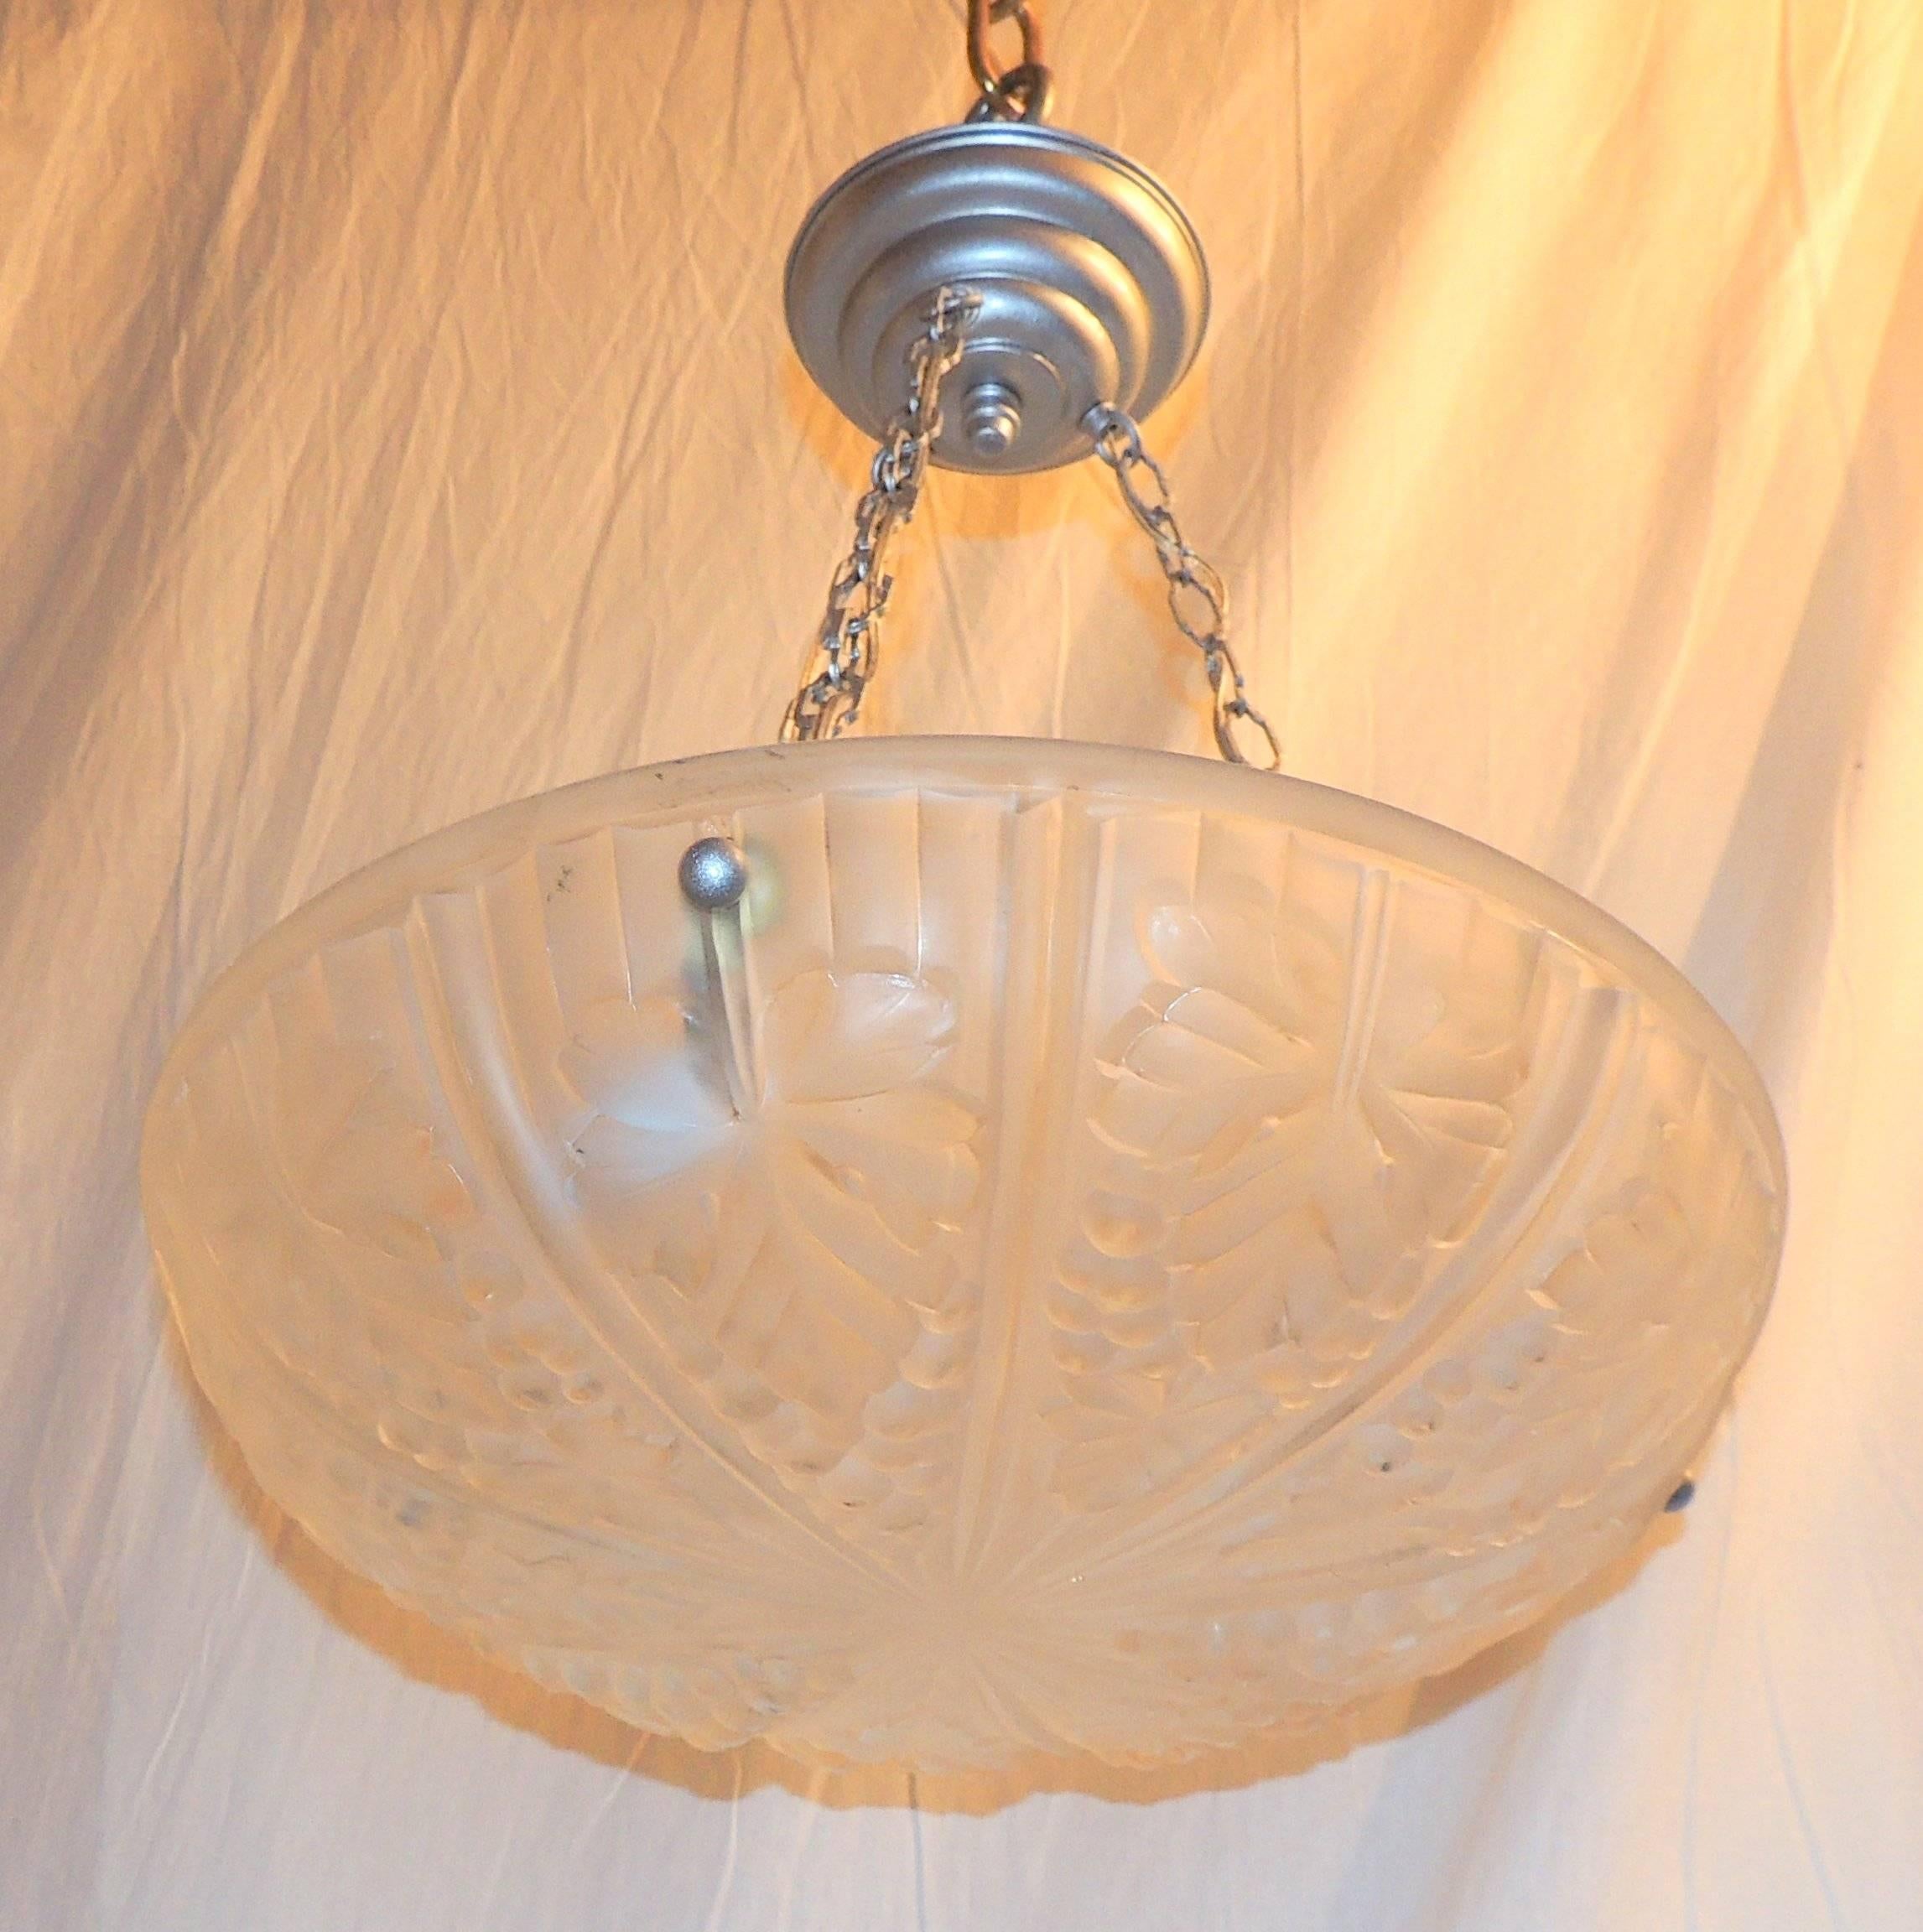 A wonderful silver and frosted Art Deco glass with leaf and fern design with three interior lights. Completely redone from sockets to wires to silver patina.

Measures: 14